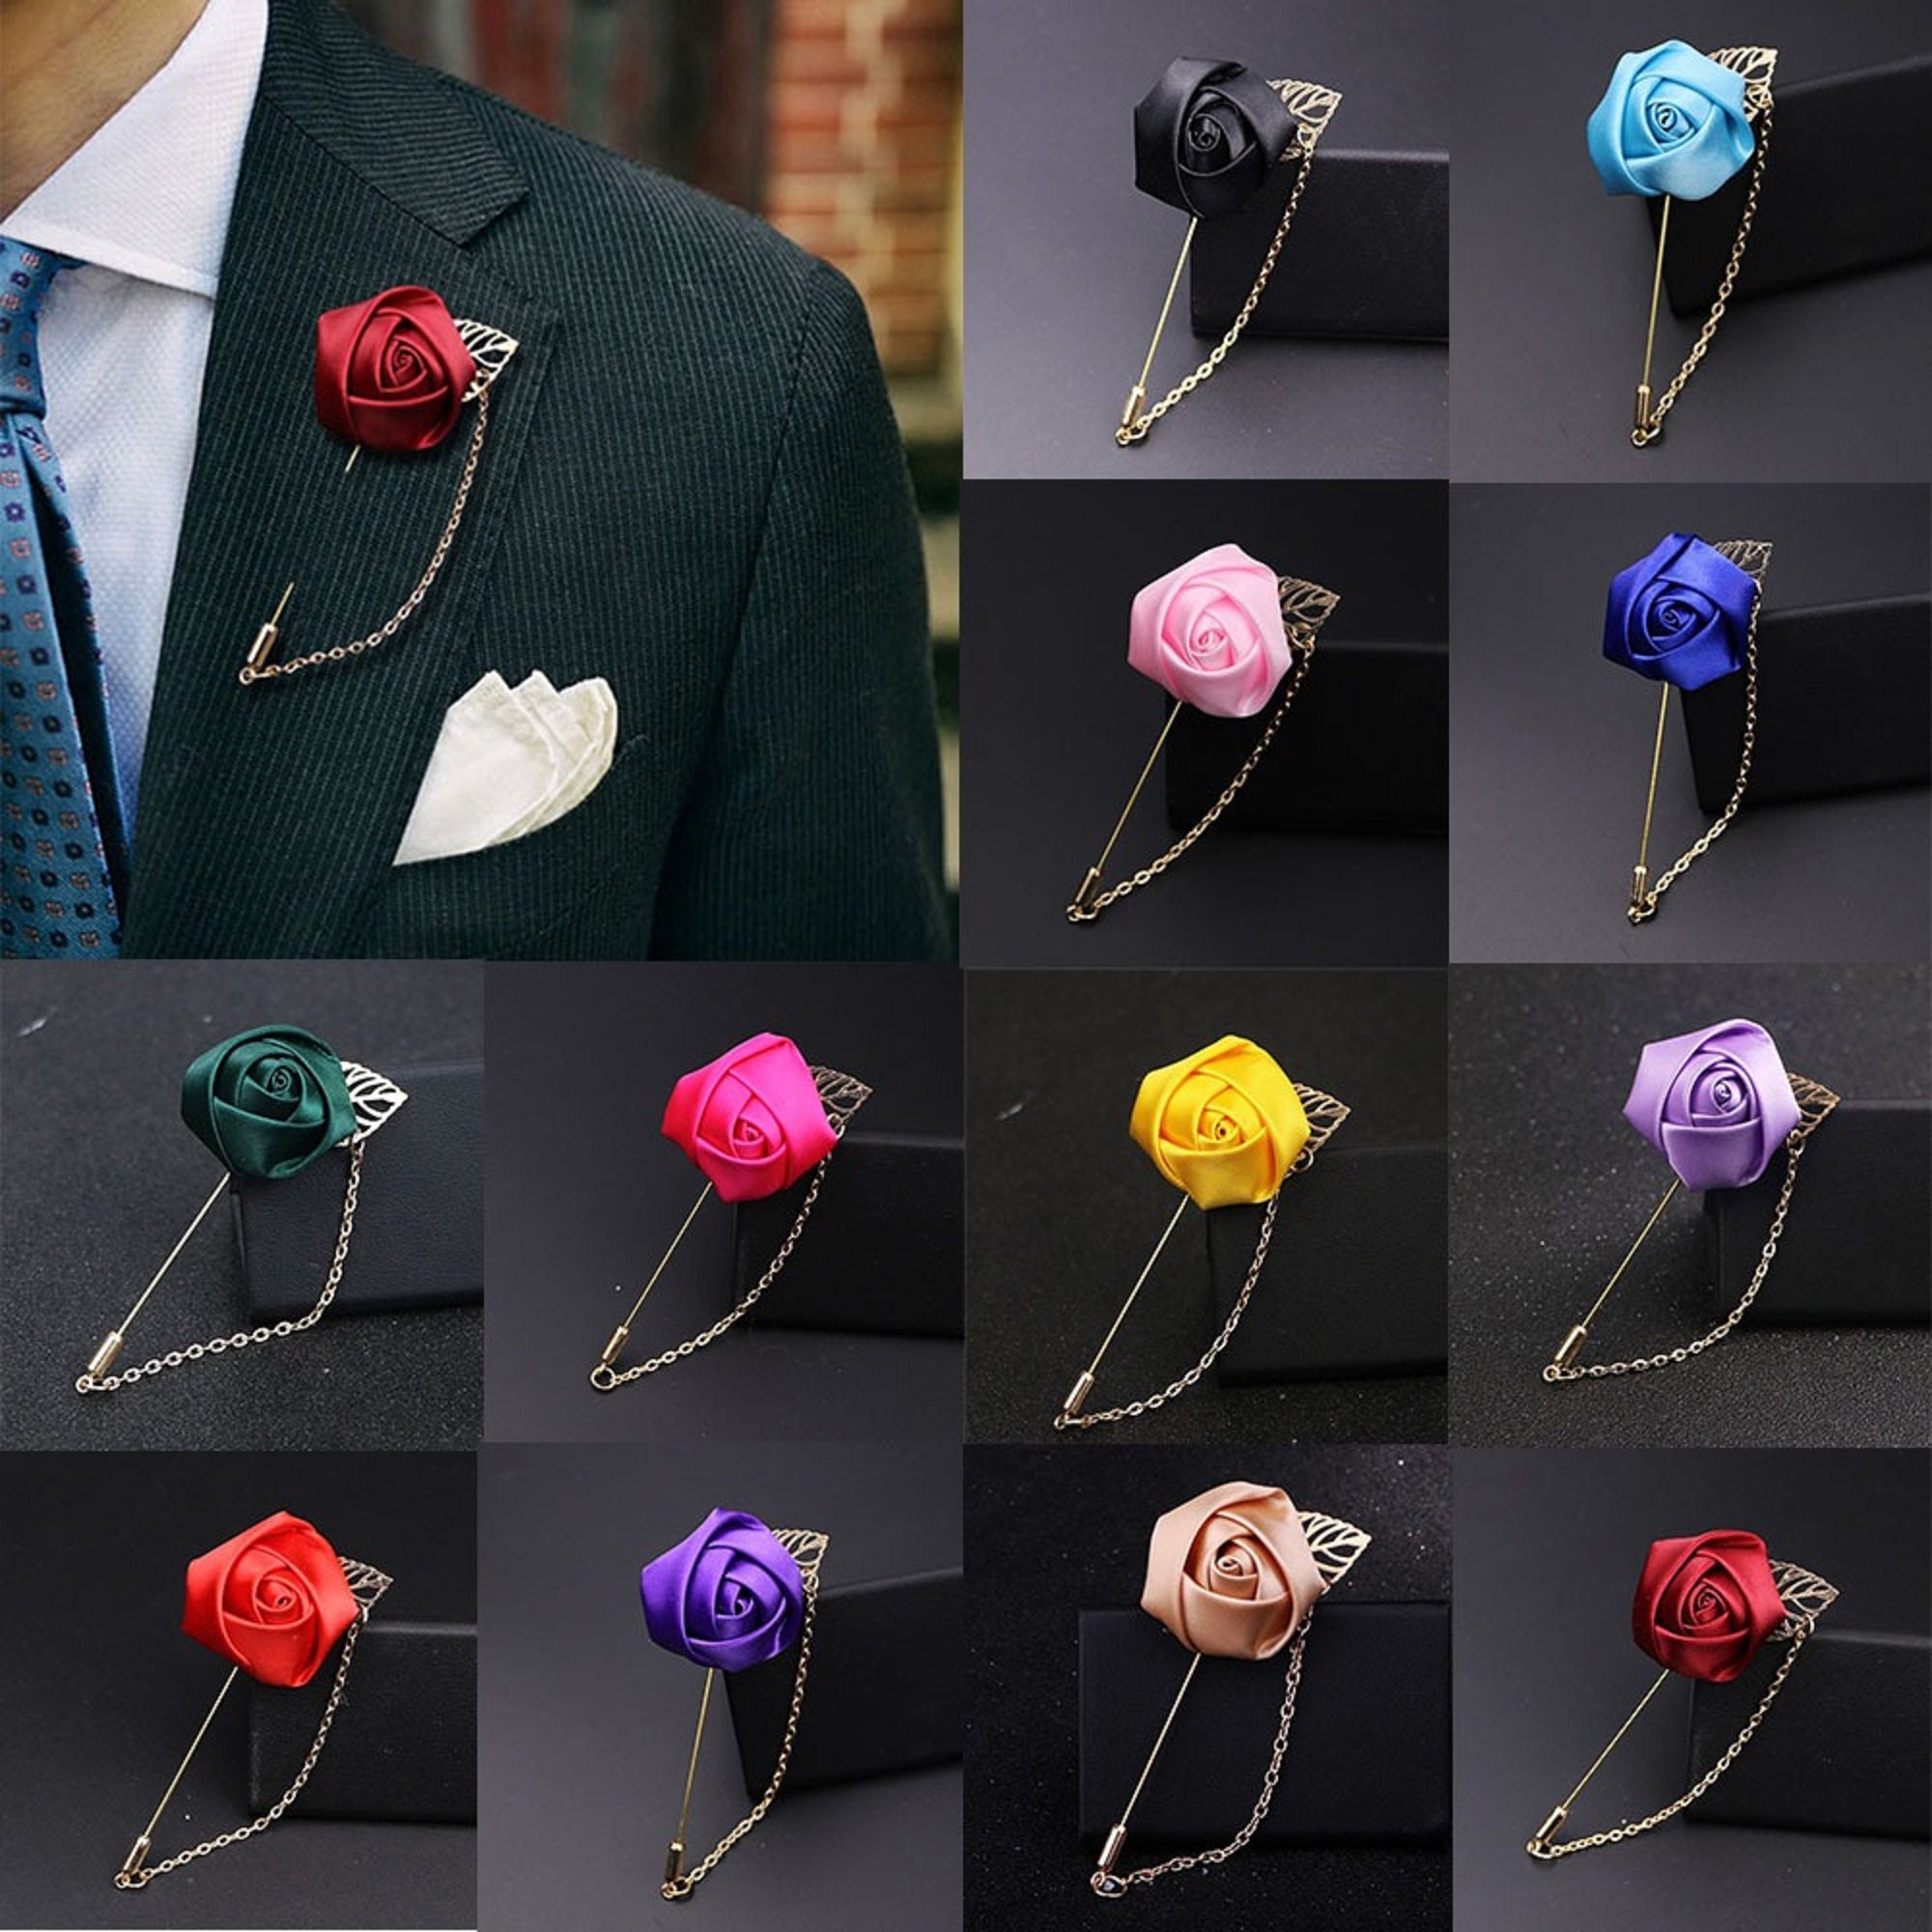 Men Cloth Rose Flower With Gold Leaf Brooch. Rose Floral Lapel Stick  Handmade Boutonniere Pins For Suit,lapel Pin Wedding Brooch